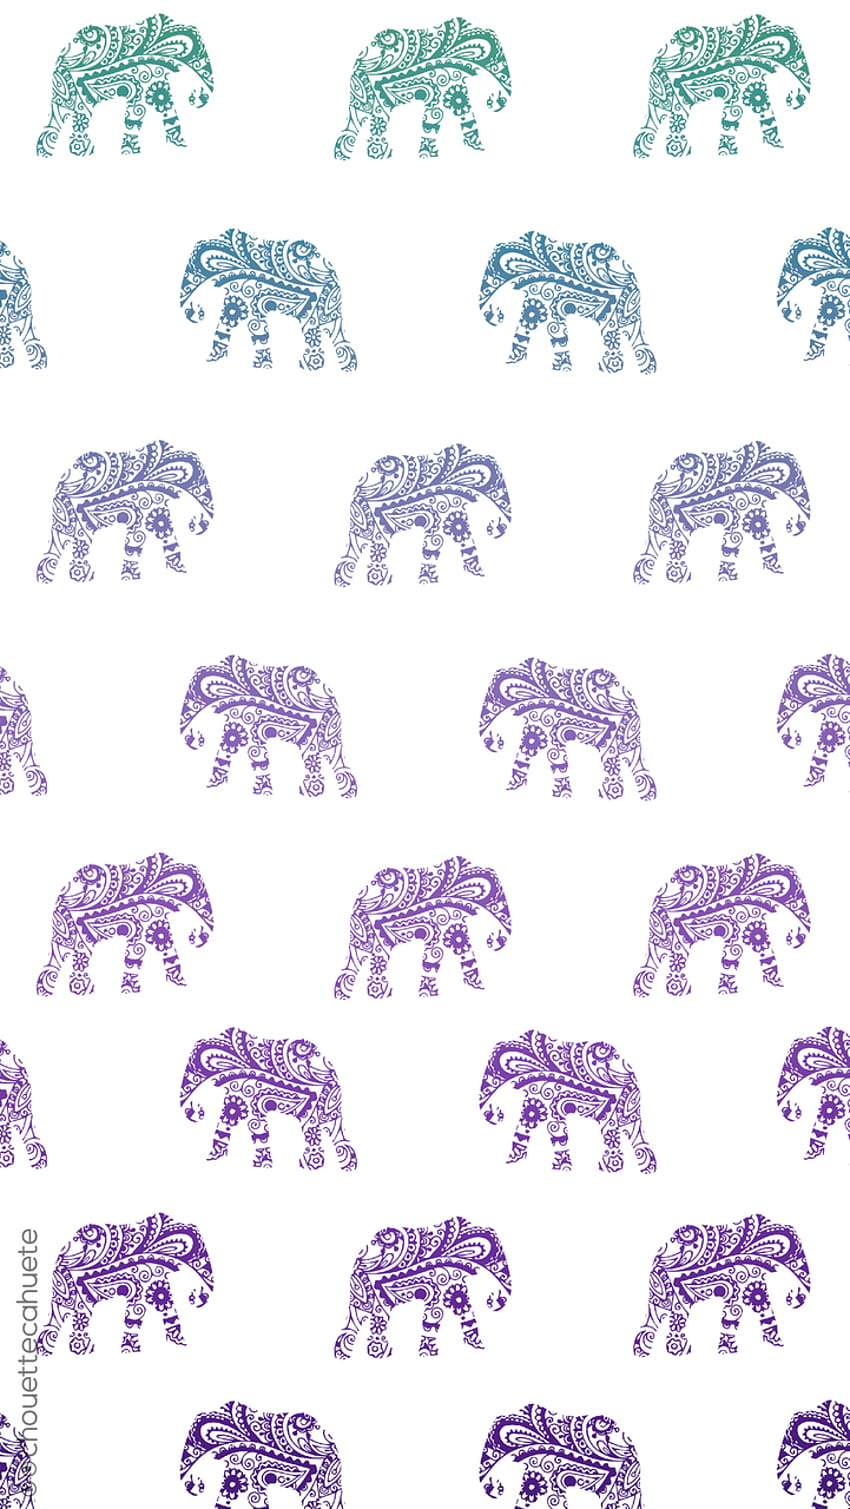 Cool Elephant For Iphone, cute elephant aesthetic HD phone wallpaper